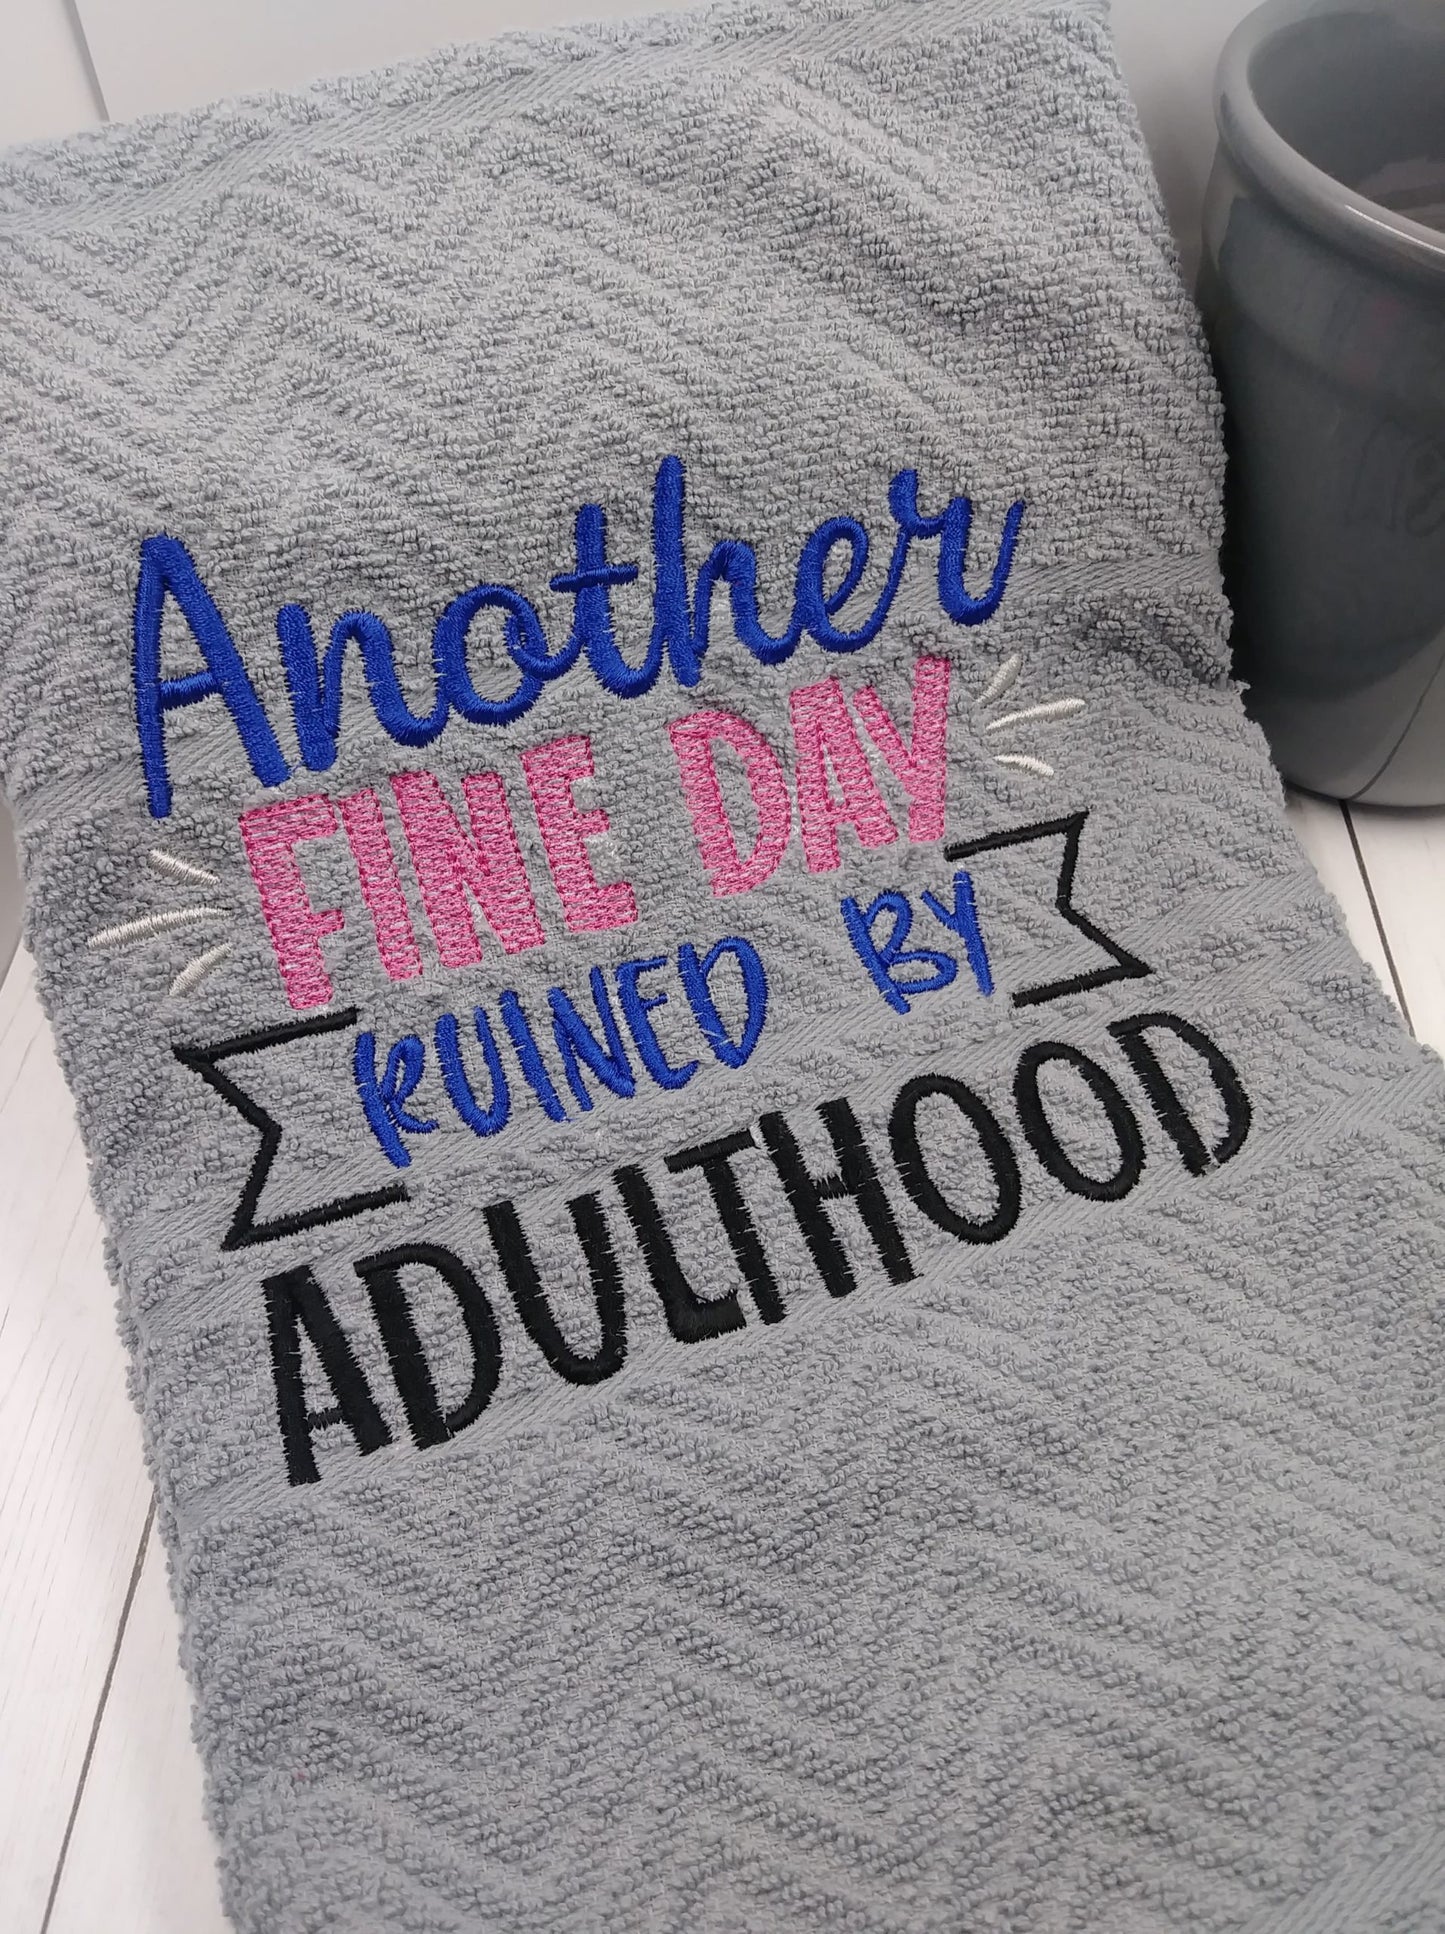 Ruined By Adulthood - 3 sizes- Digital Embroidery Design